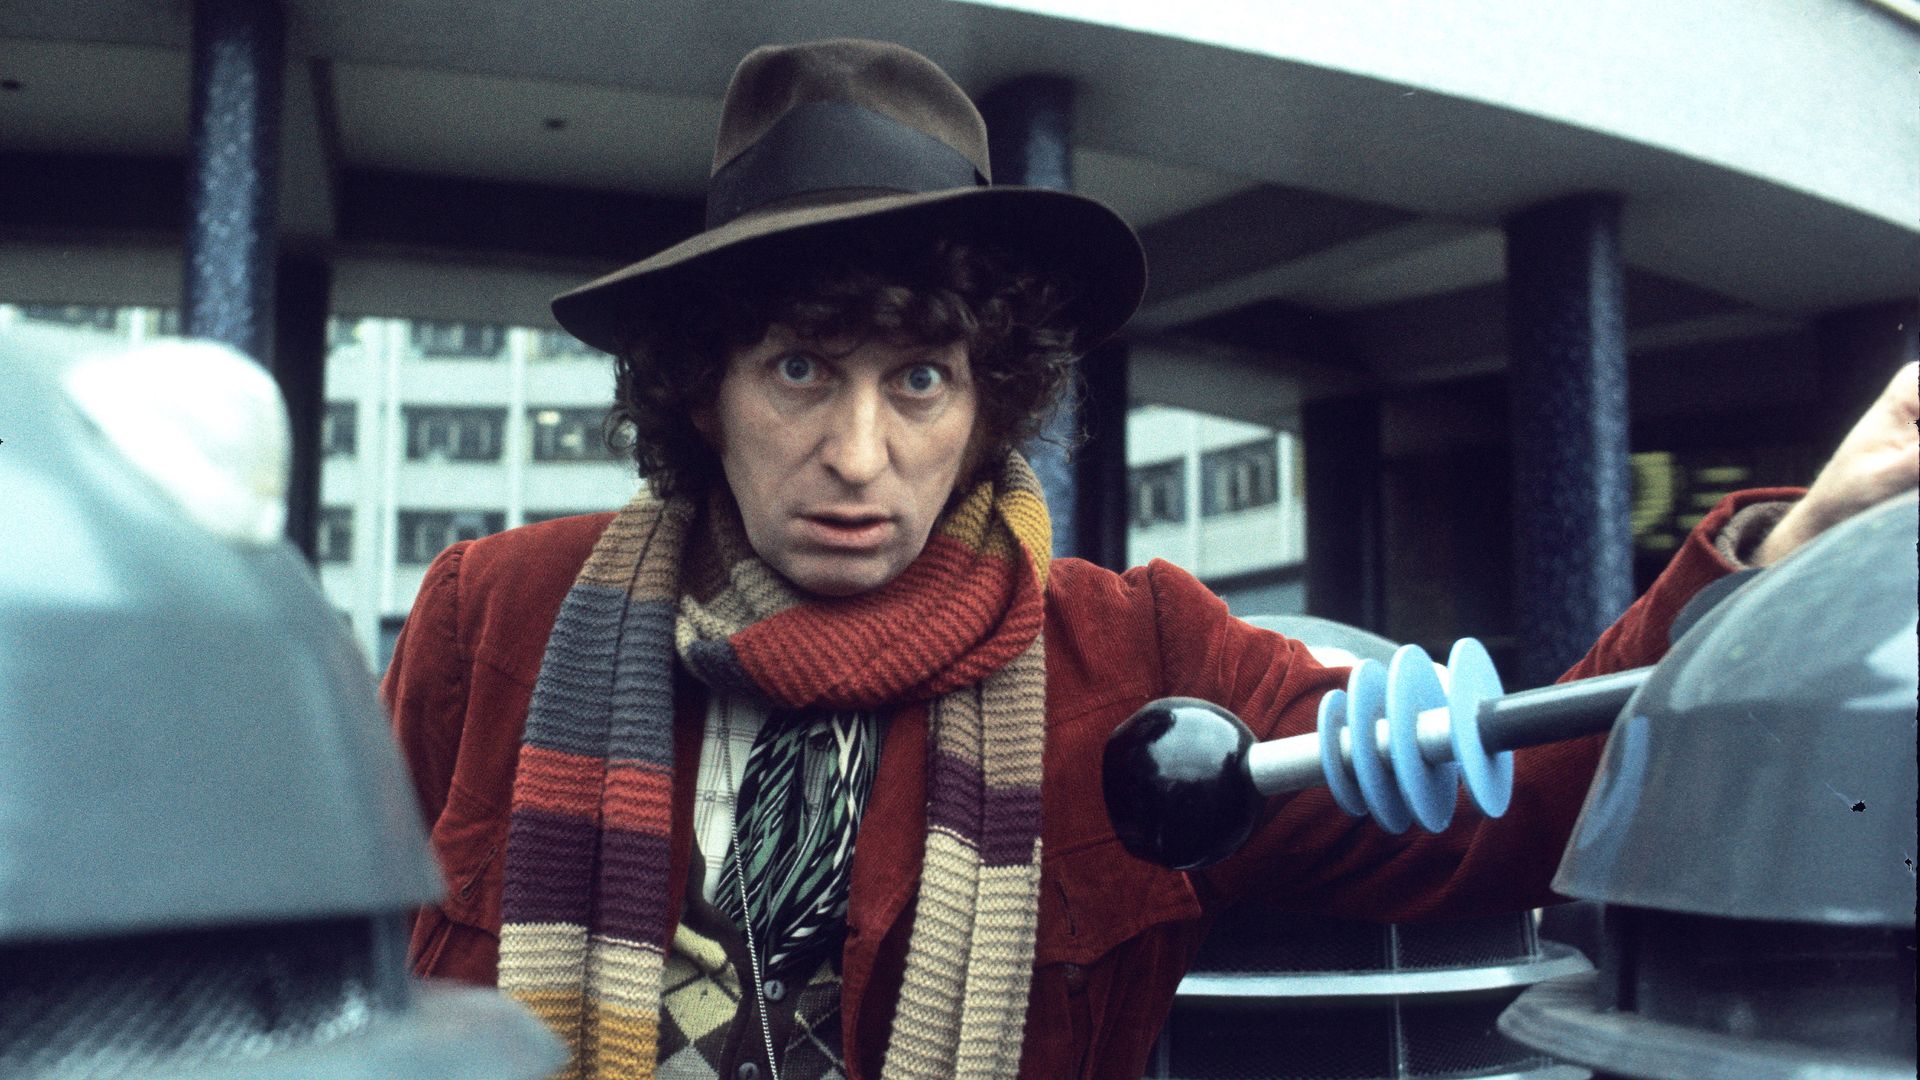 Tom Baker in character as The Doctor with two Daleks